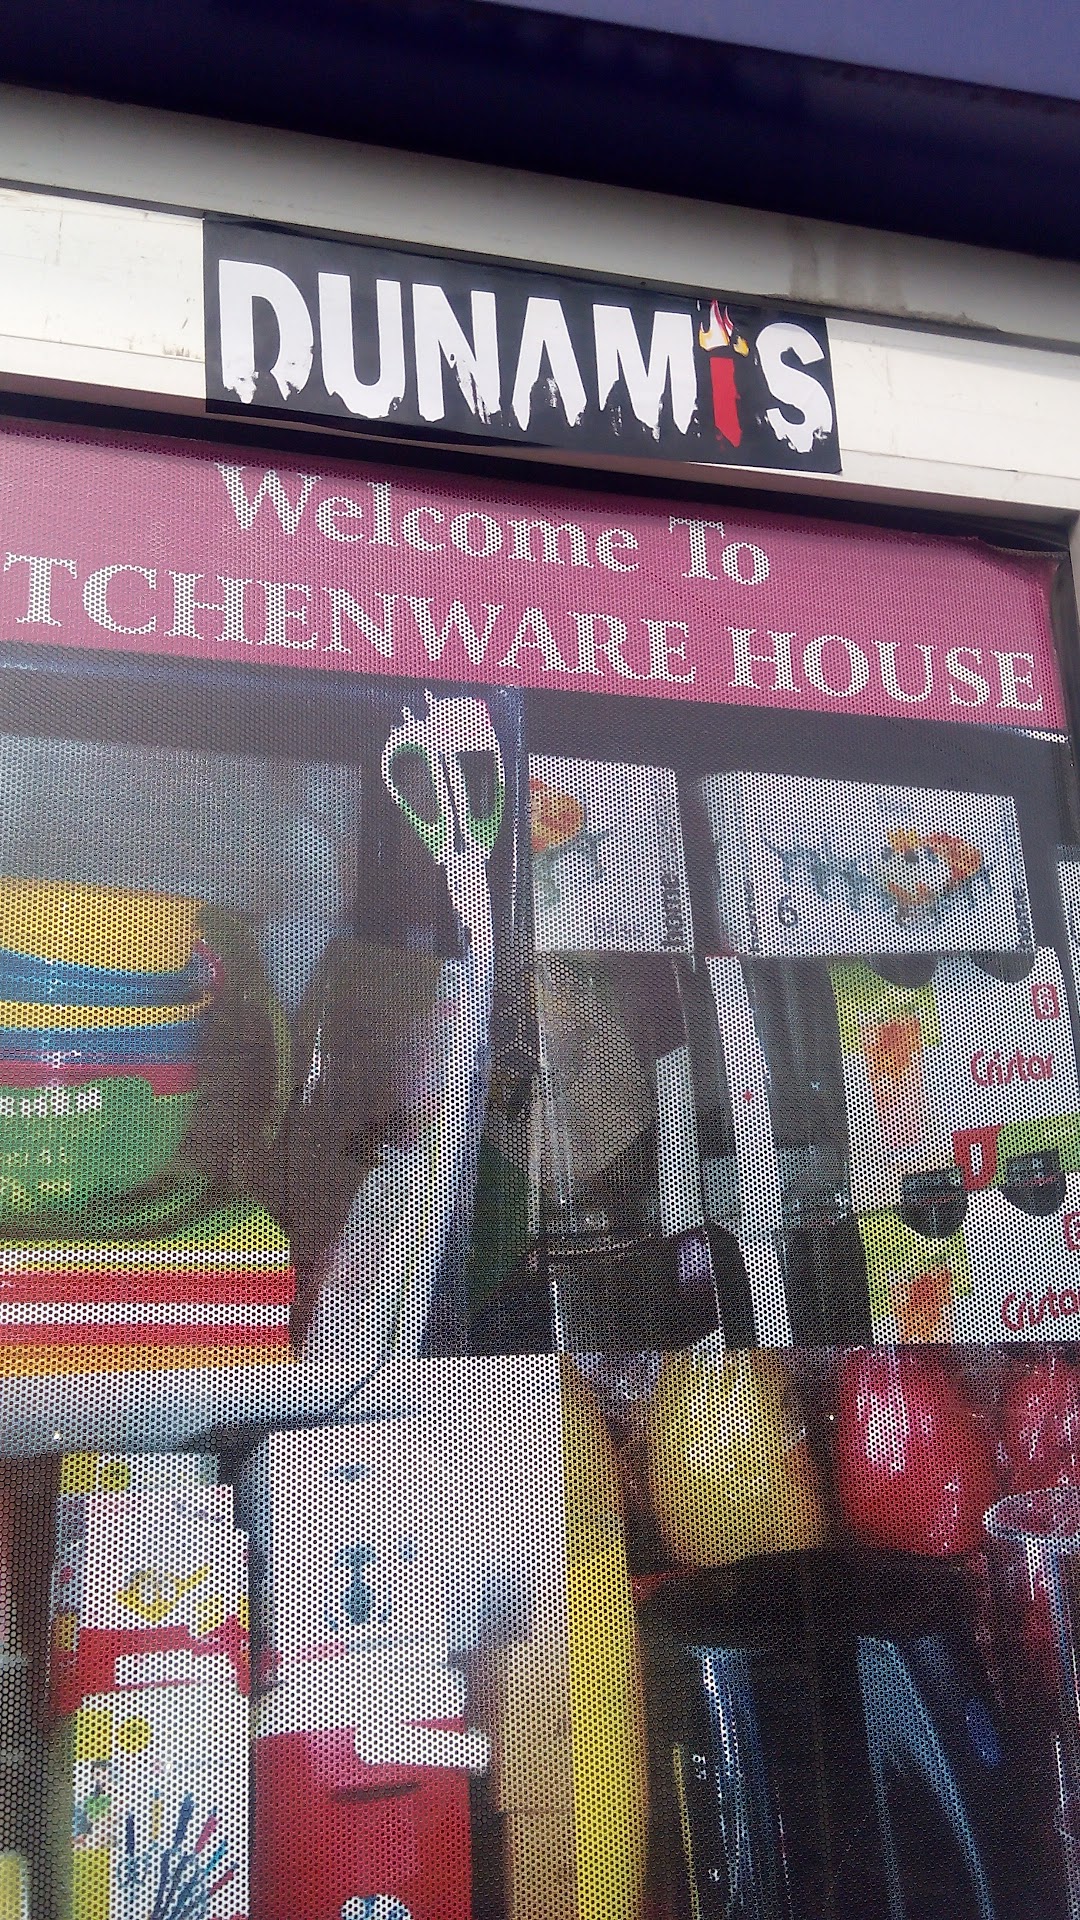 The kitchenware House